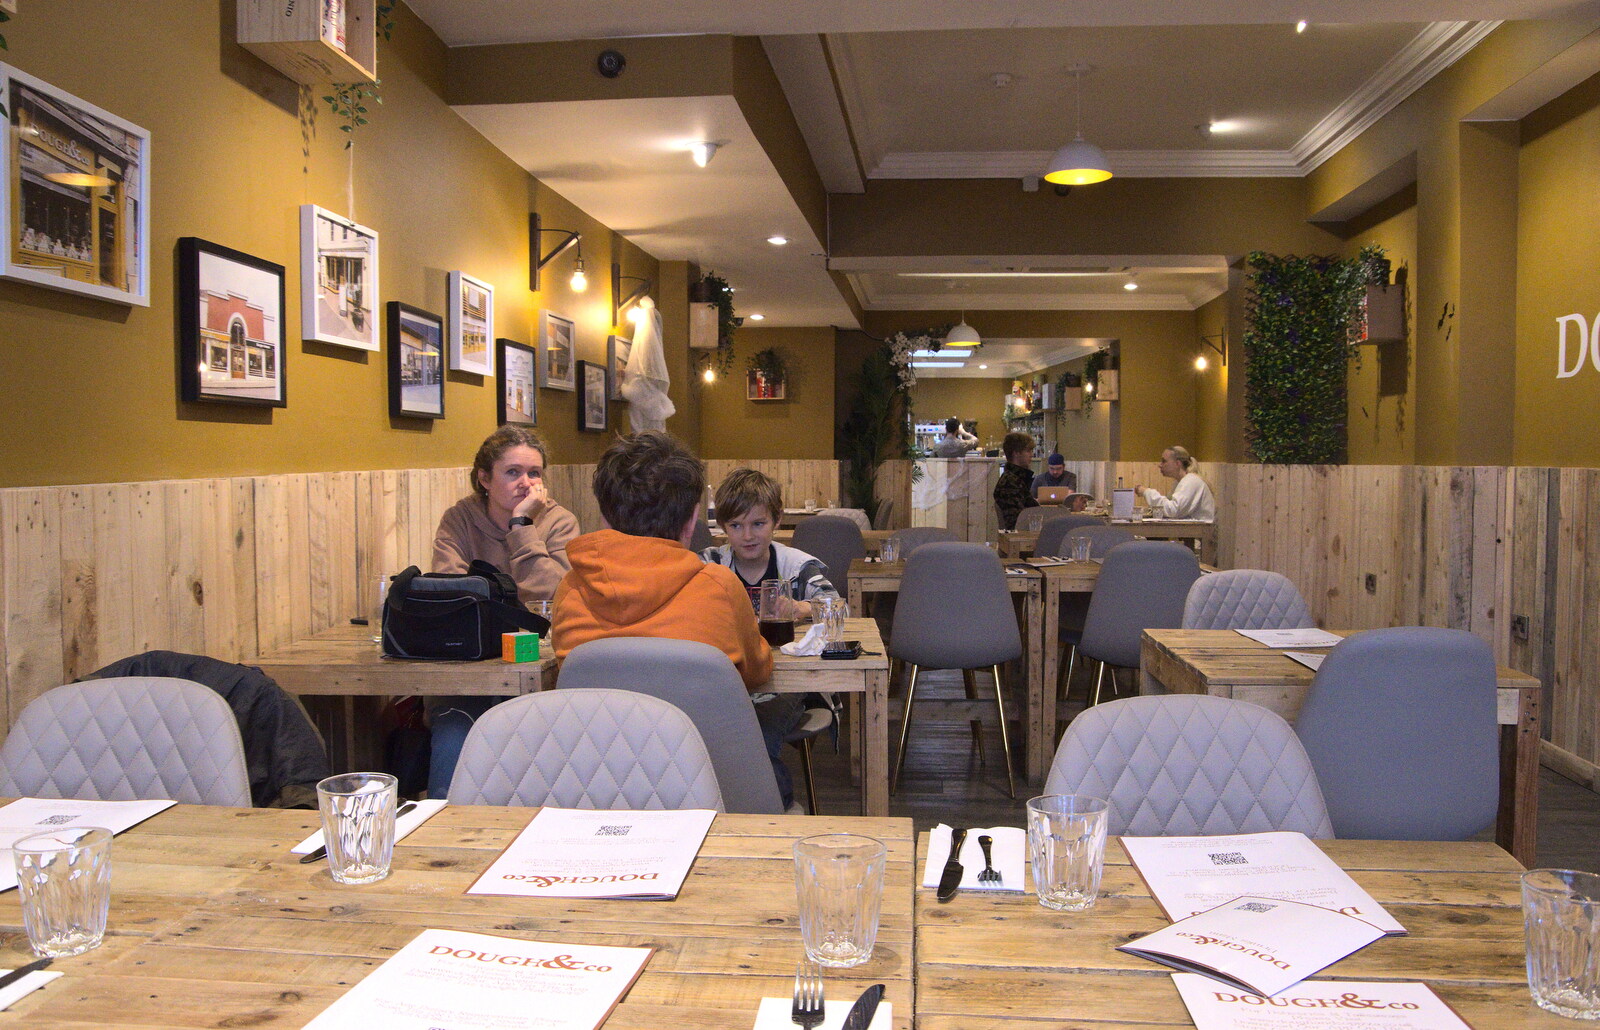 Pizza and Pasta in Bury St. Edmunds, Suffolk - 30th October 2022: Hanging out in Dough & Co